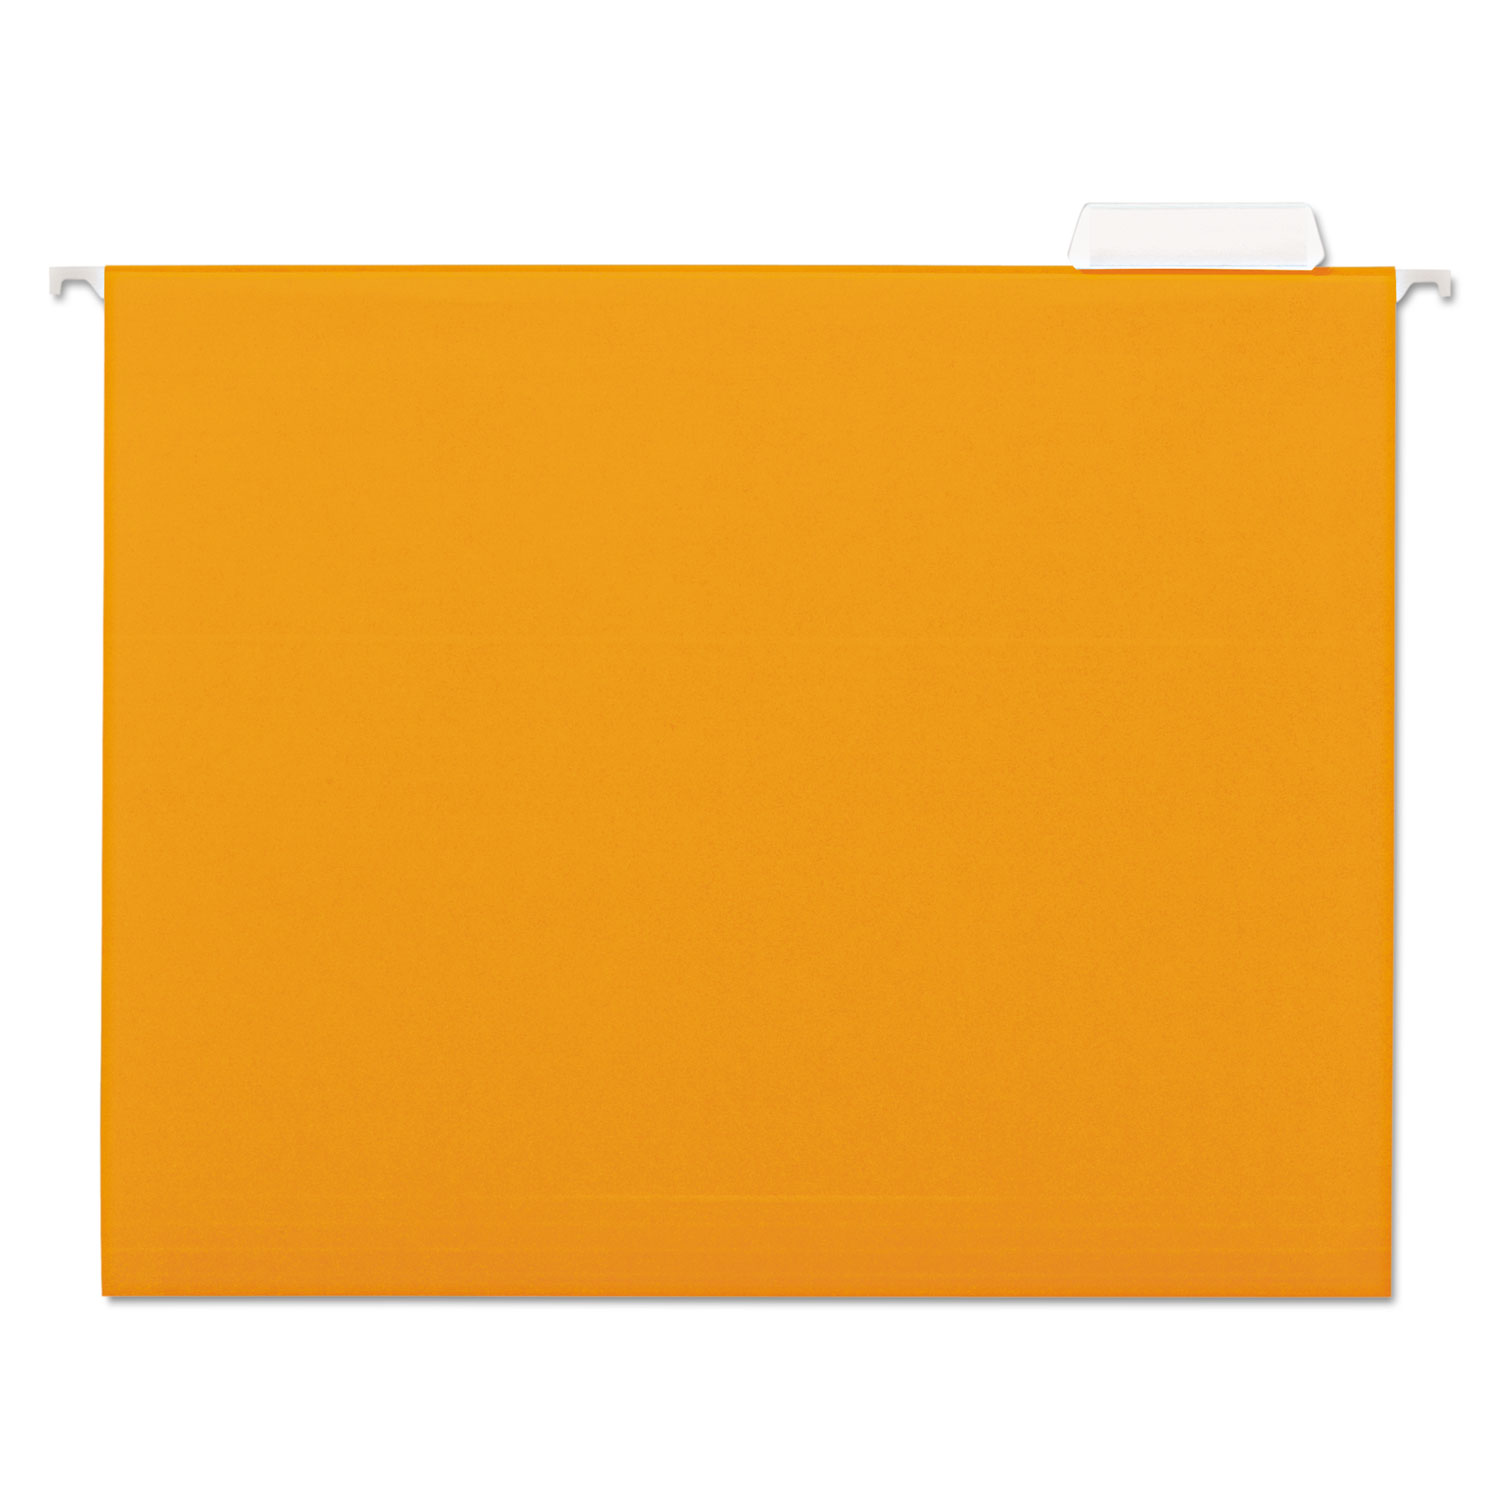 Deluxe Bright Color Hanging File Folders, Letter Size, 1/5-Cut Tab, Orange, 25/Box